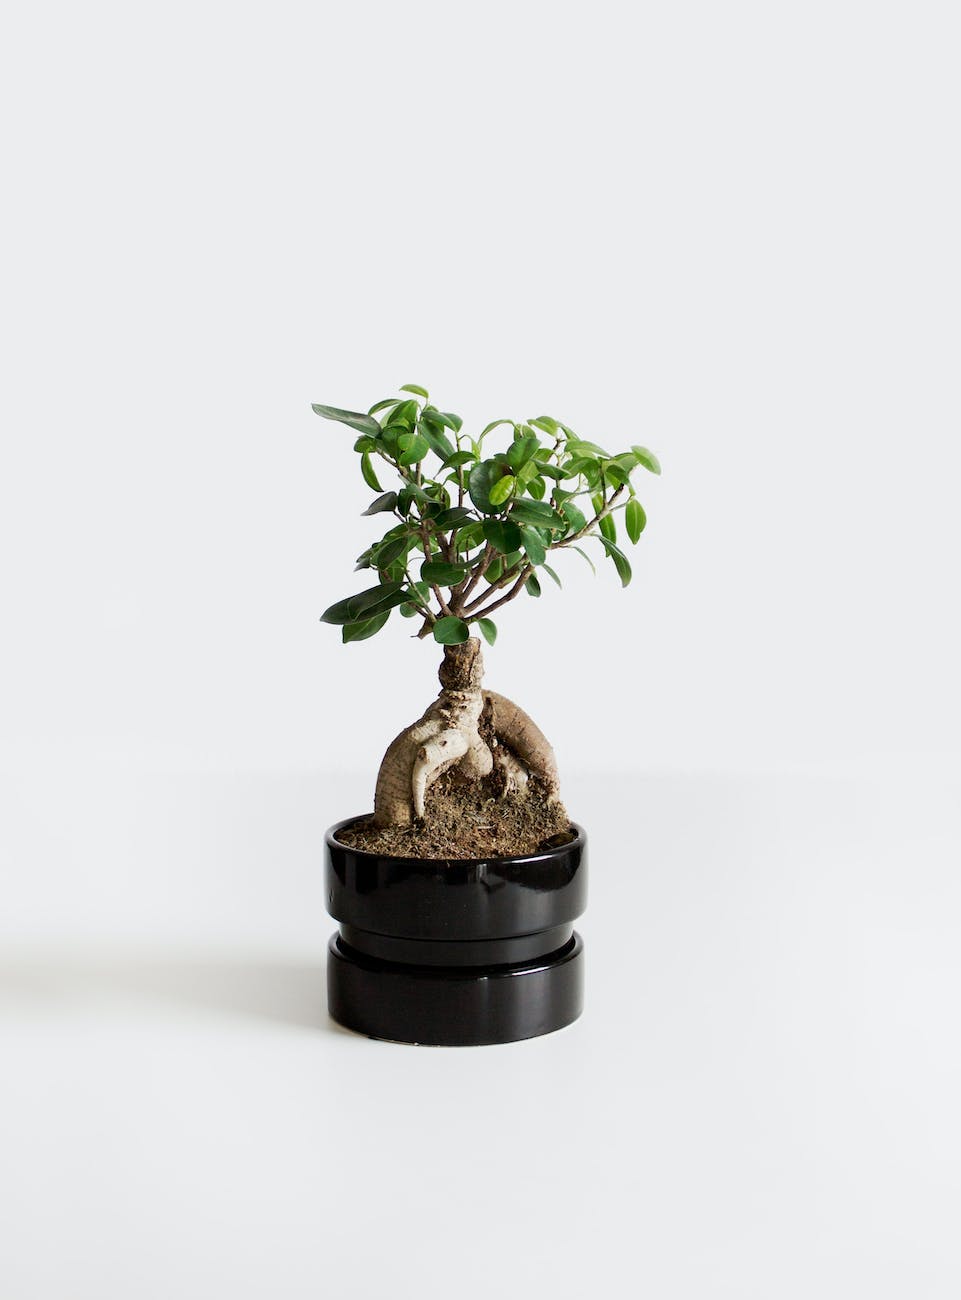 Bonsai Tree Pests and Diseases: Identifying and Treating Common Issues